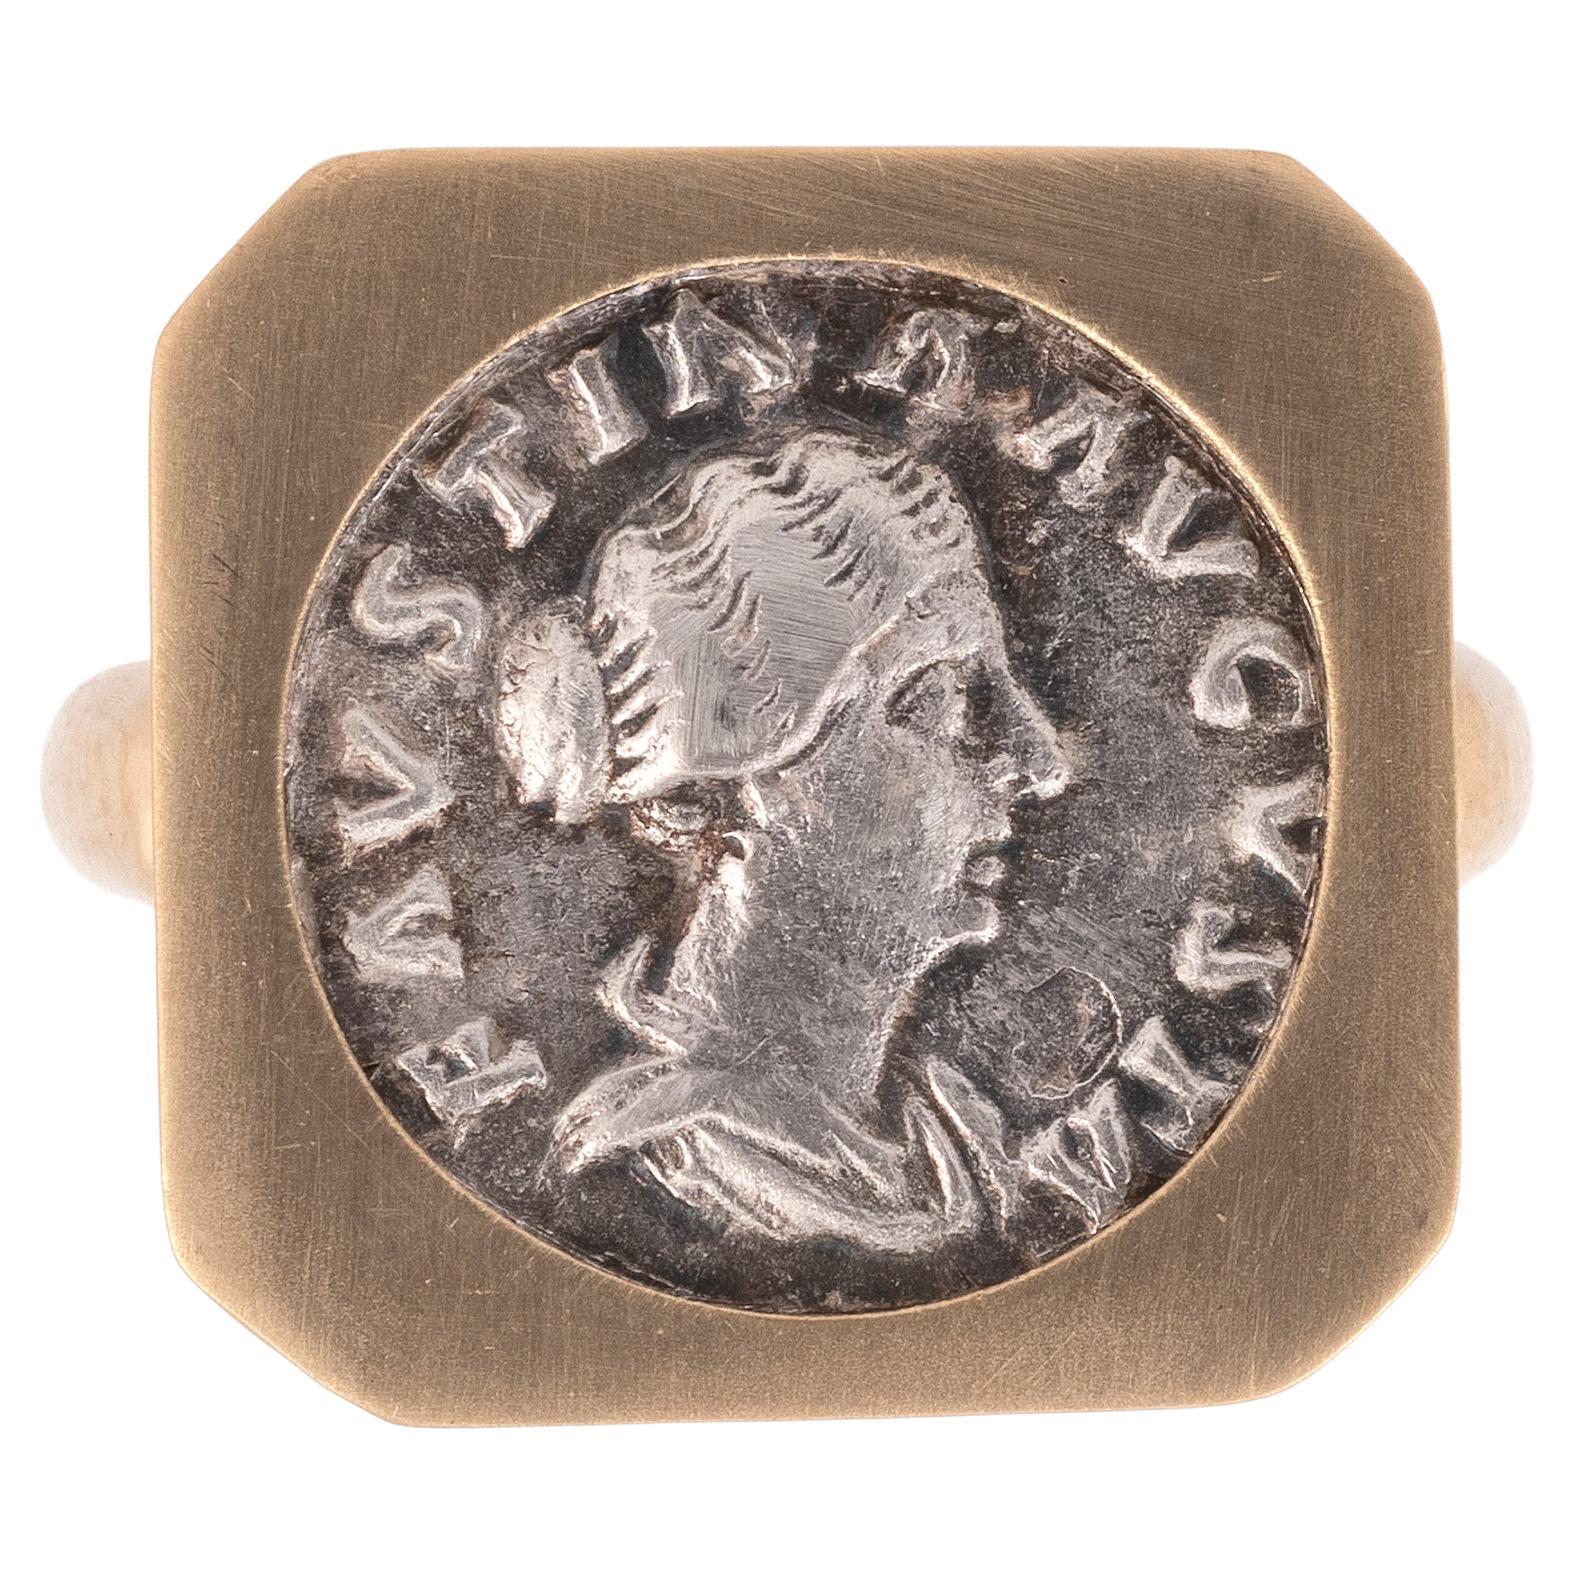 The younger Faustina was perhaps the most noble woman in all Roman history. Daughter of the emperor Antoninus Pius, she married his successor Marcus Aurelius, and became the mother of the emperor Commodus. This superb coin portrait shows her not